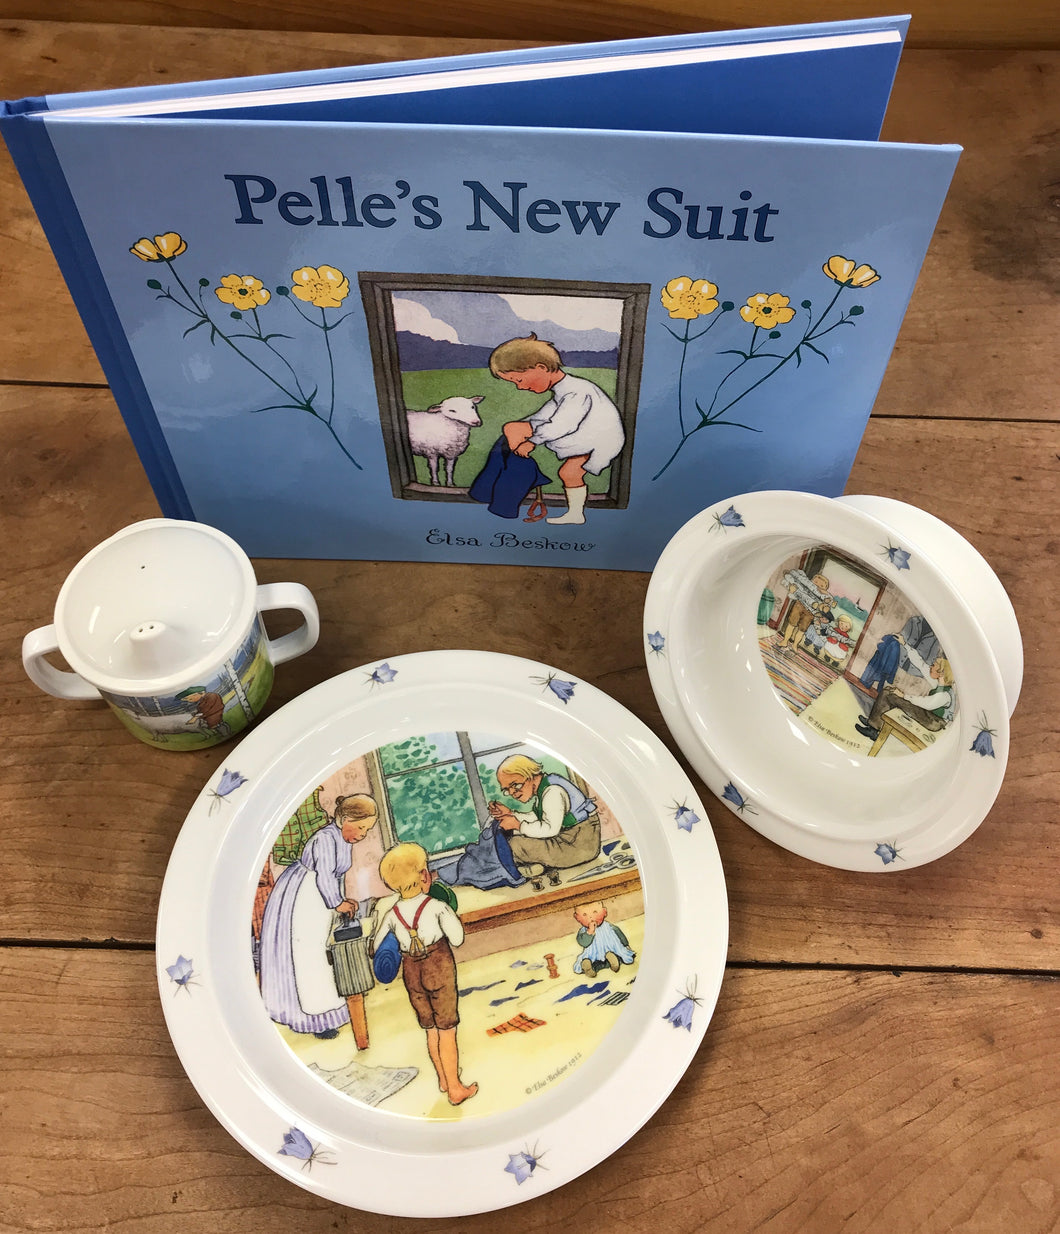 Pelle's New Suit Book and Dish Set